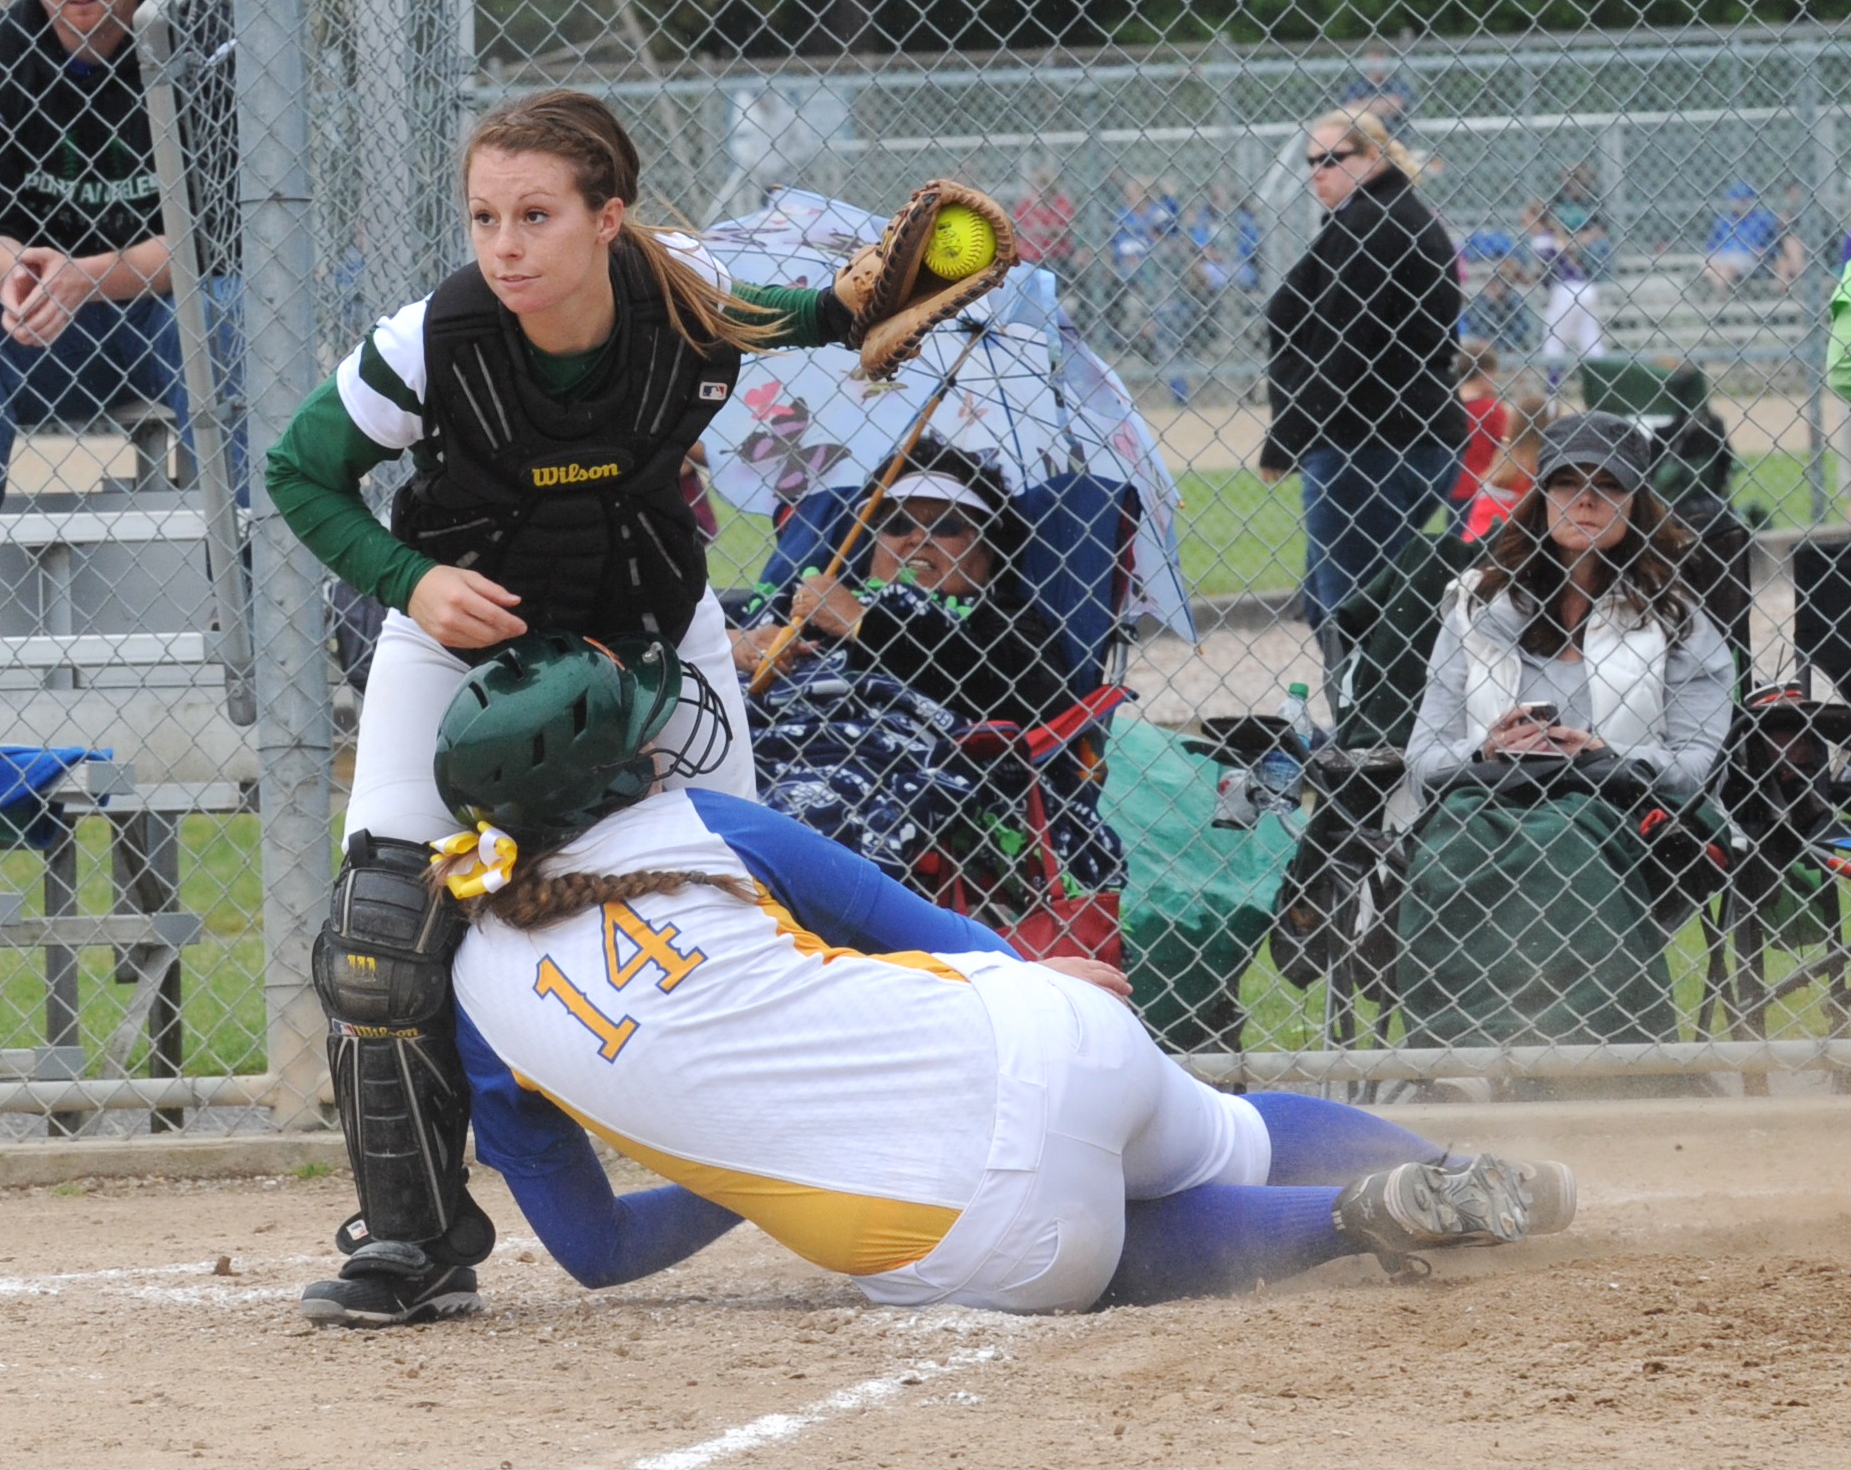 Port Angeles catcher Tori Kuch looks towards the bases for advancing runners after Fife's Breanna Richardson was called out at the plate. Lonnie Archibald/for Peninsula Daily News